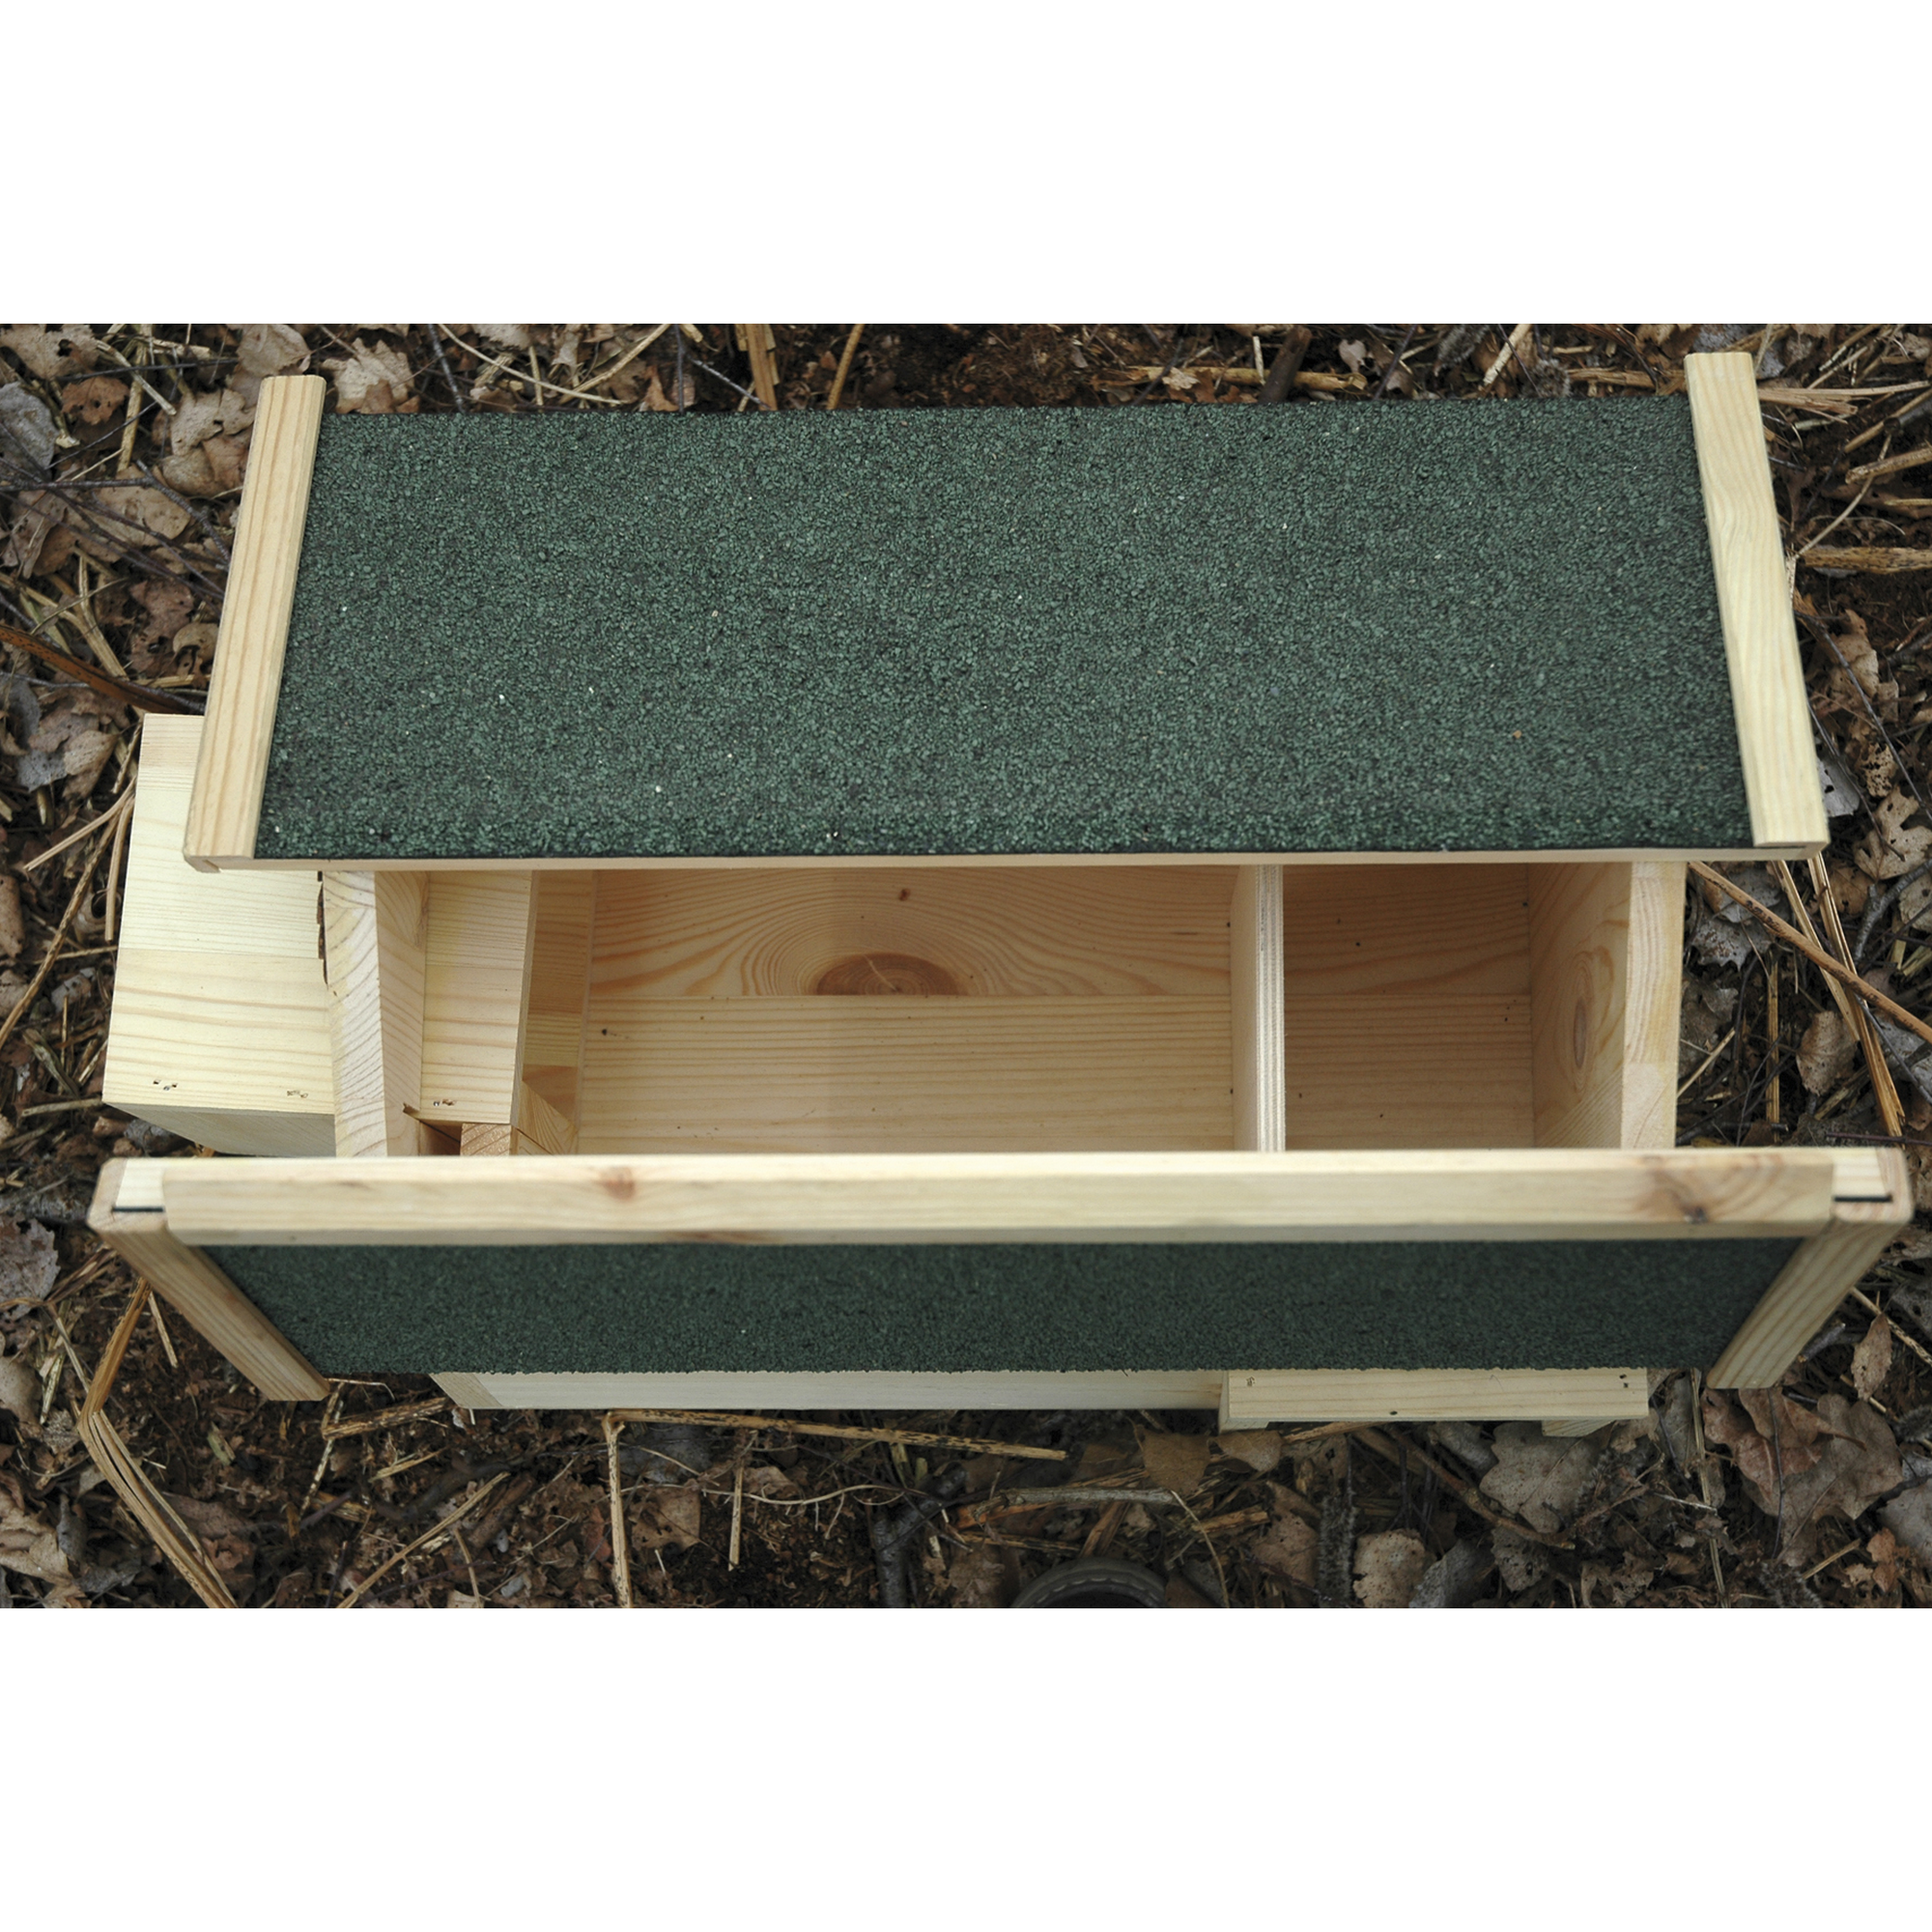 Igelfutterhaus Holz 47,5 x 34,5 x 26 cm + product picture